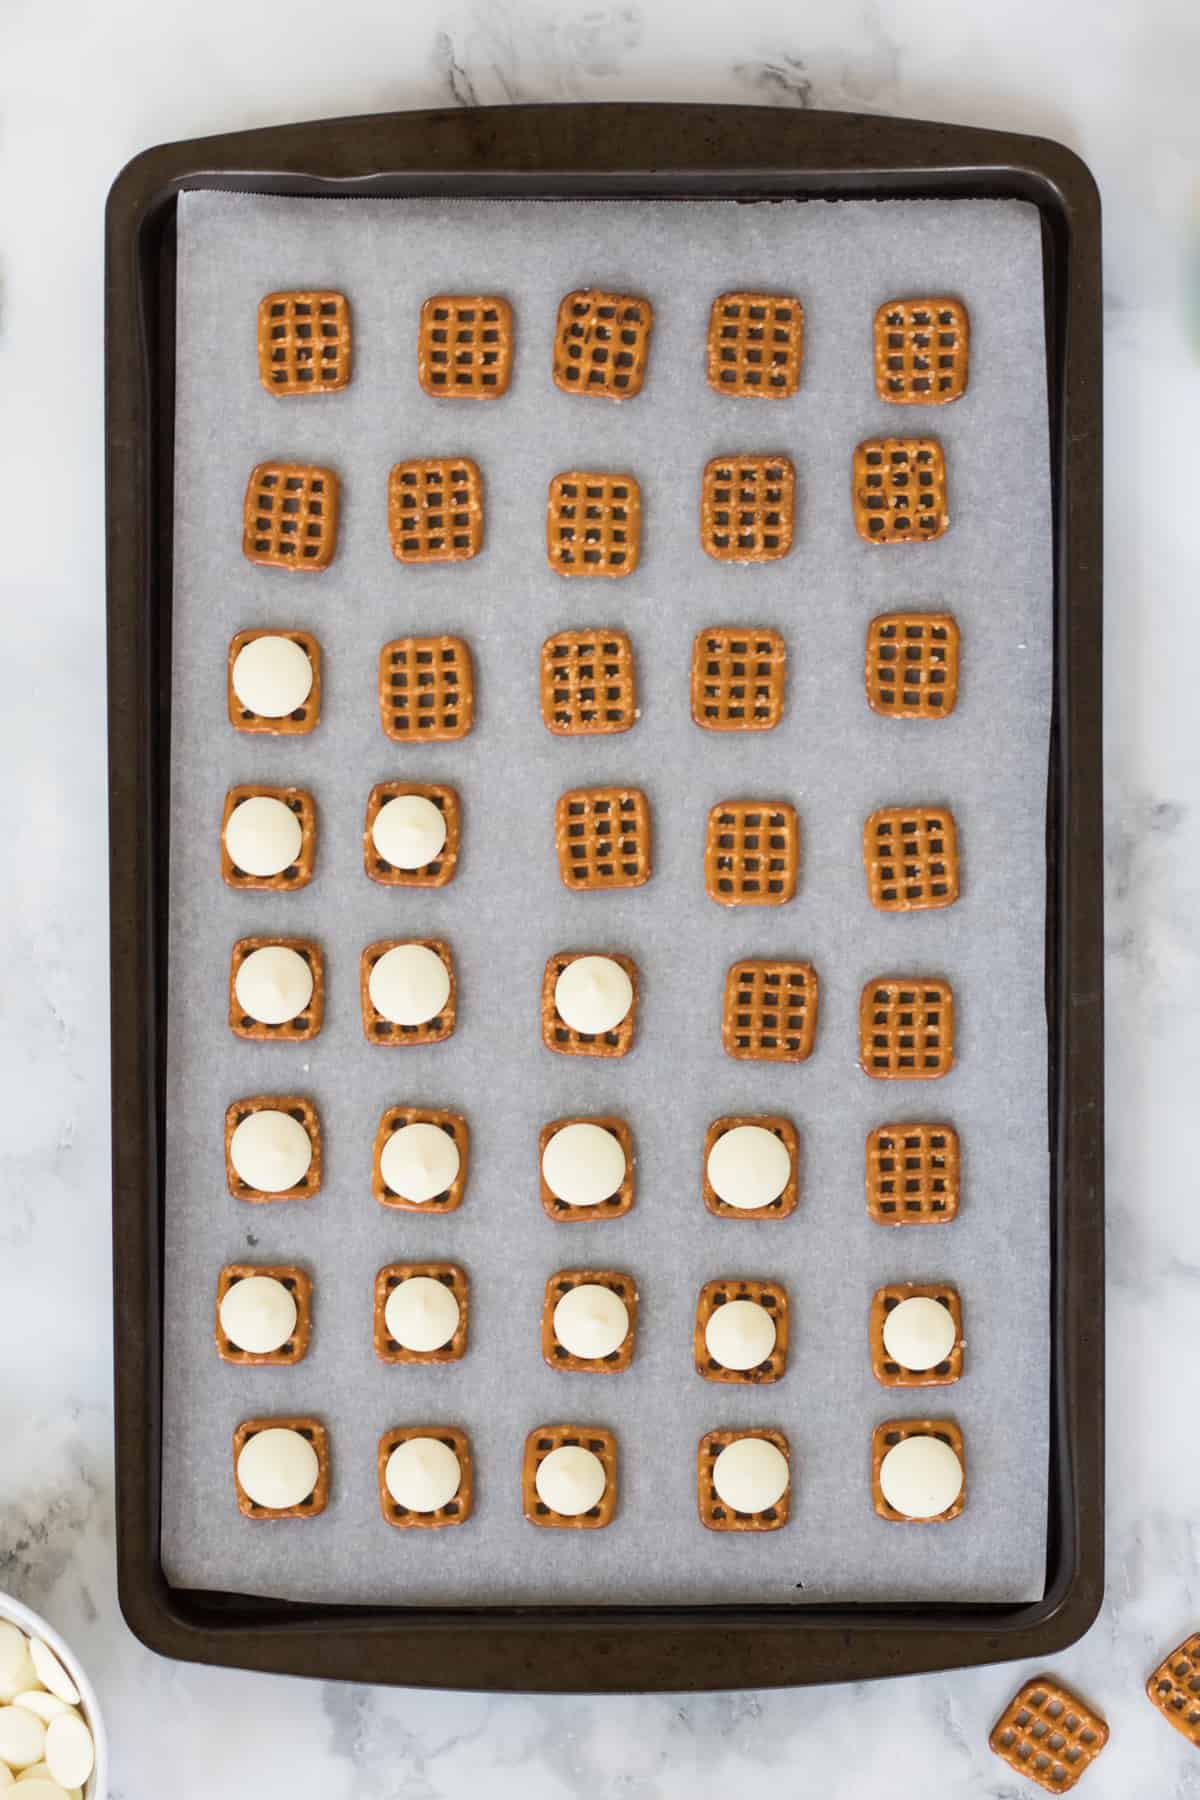 Baking sheet with rows of square pretzels. Half of the pretzels are topped with white chocolate melting wafers.